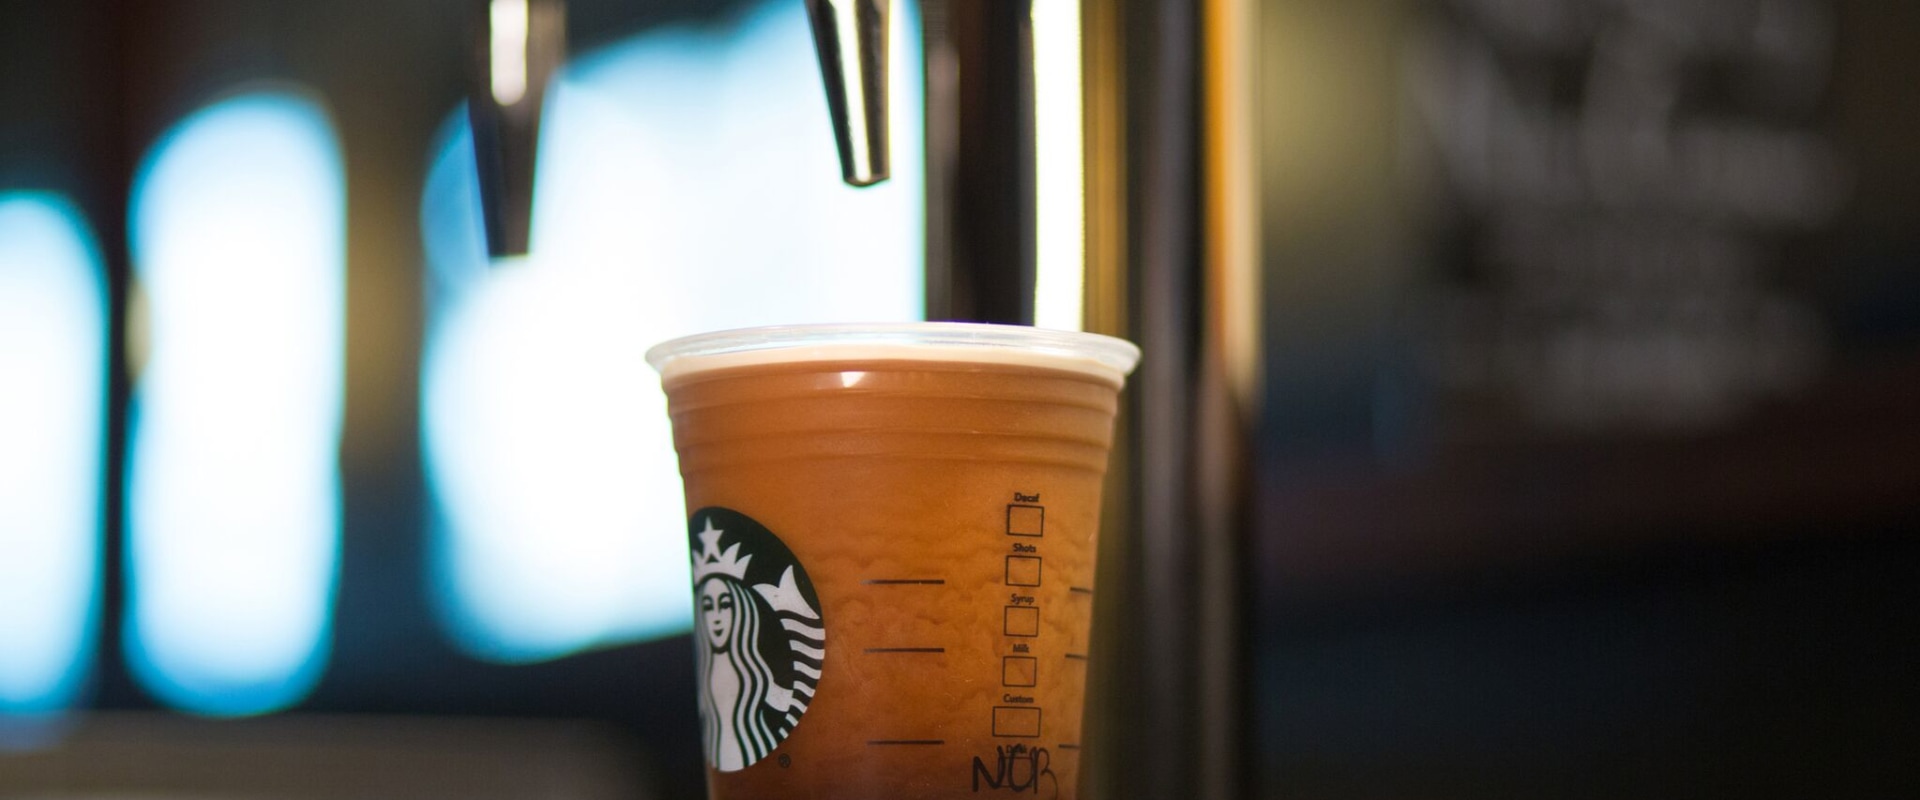 What is starbucks nitro cold brew made of?